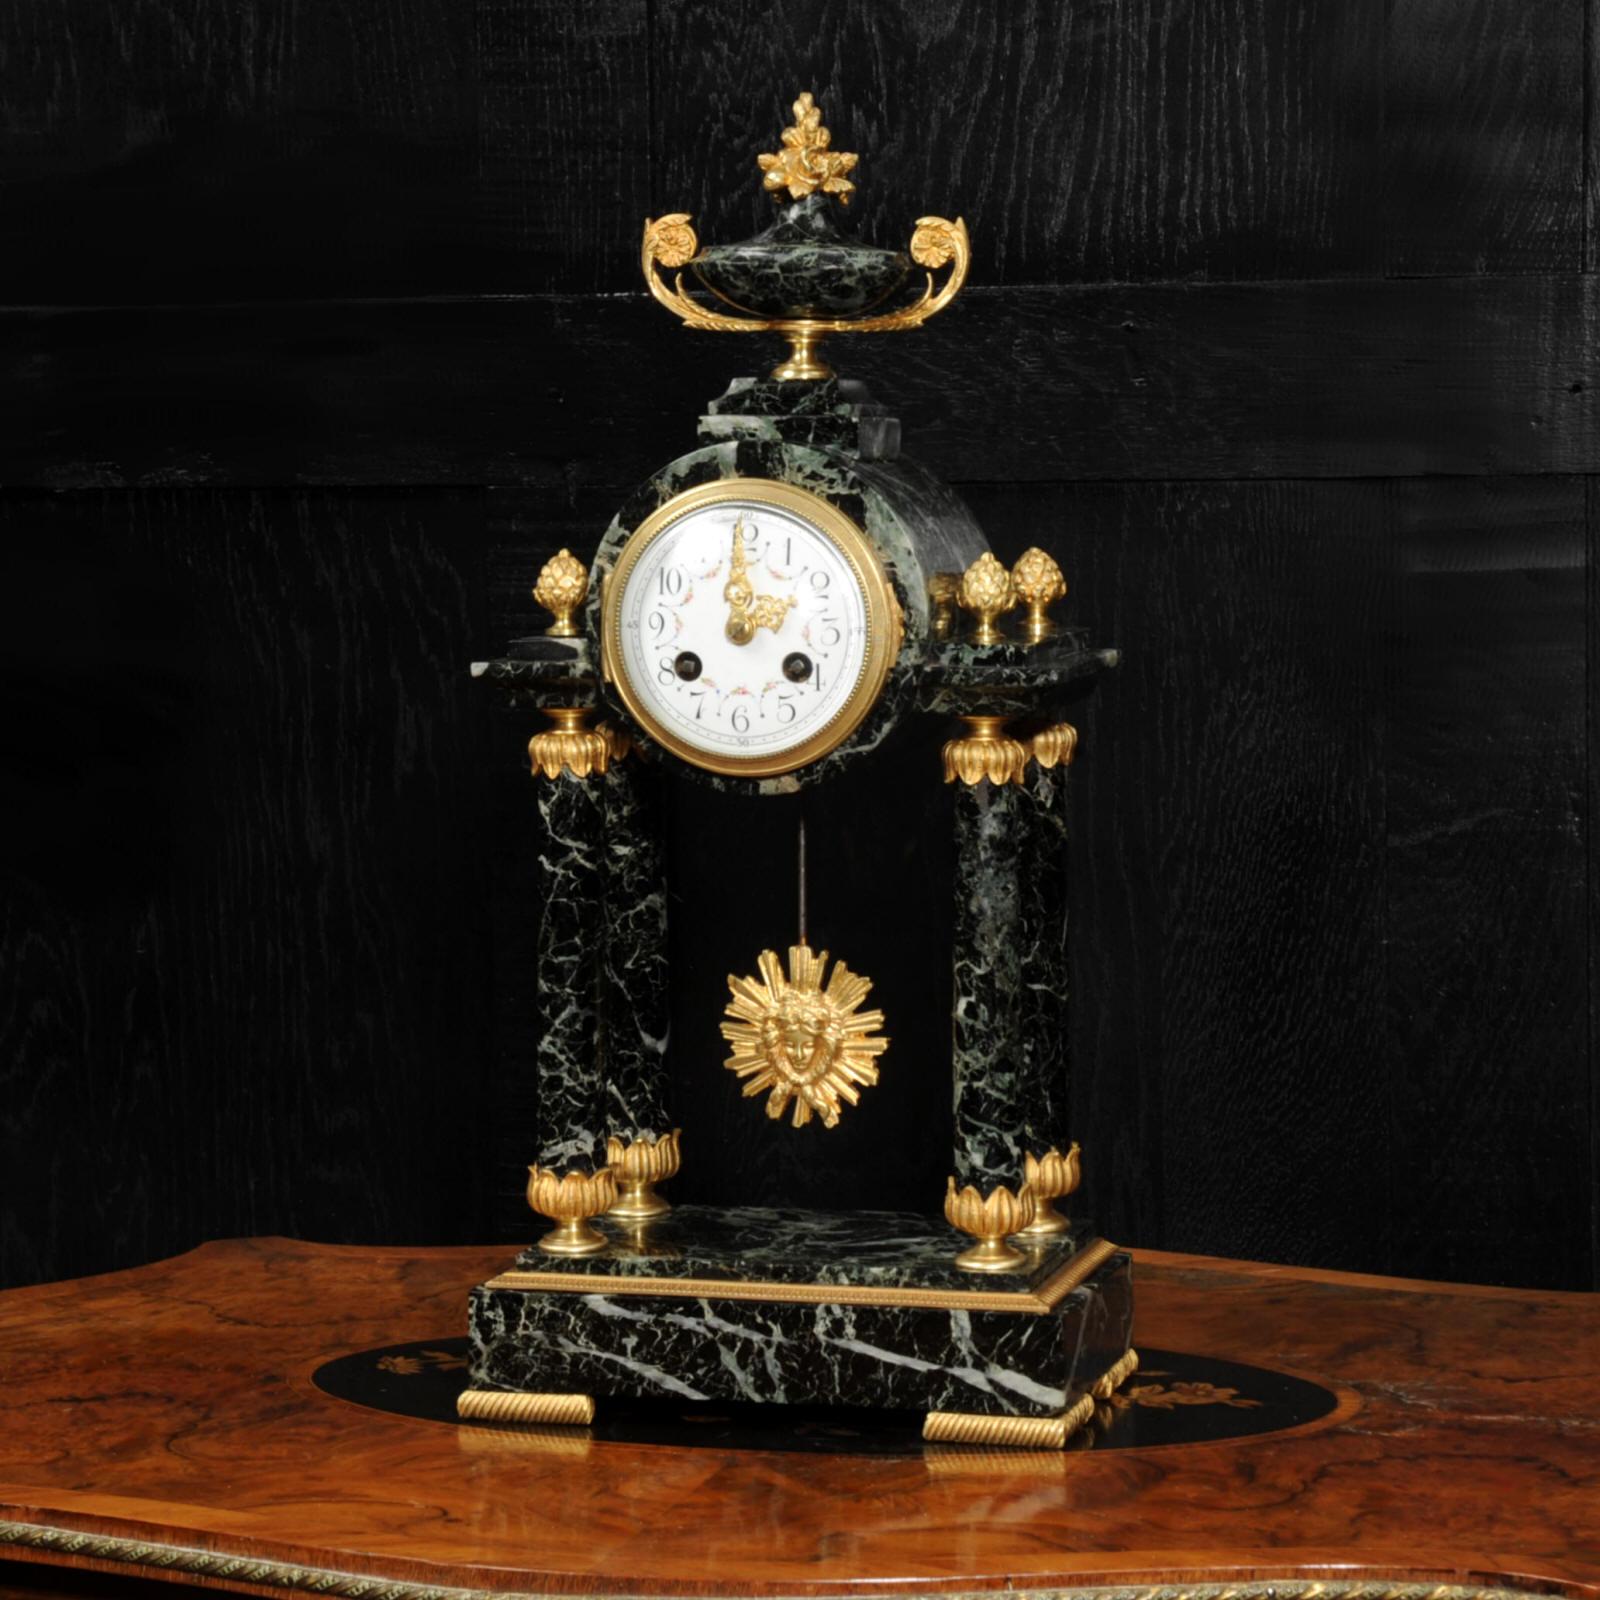 A superb original antique French portico clock. Beautifully modelled in the Empire style in a stunning variegated green marble with finely gilded ormolu bronze mounts. The clock is formed as a four pillar portico, the movement mounted in a drum with